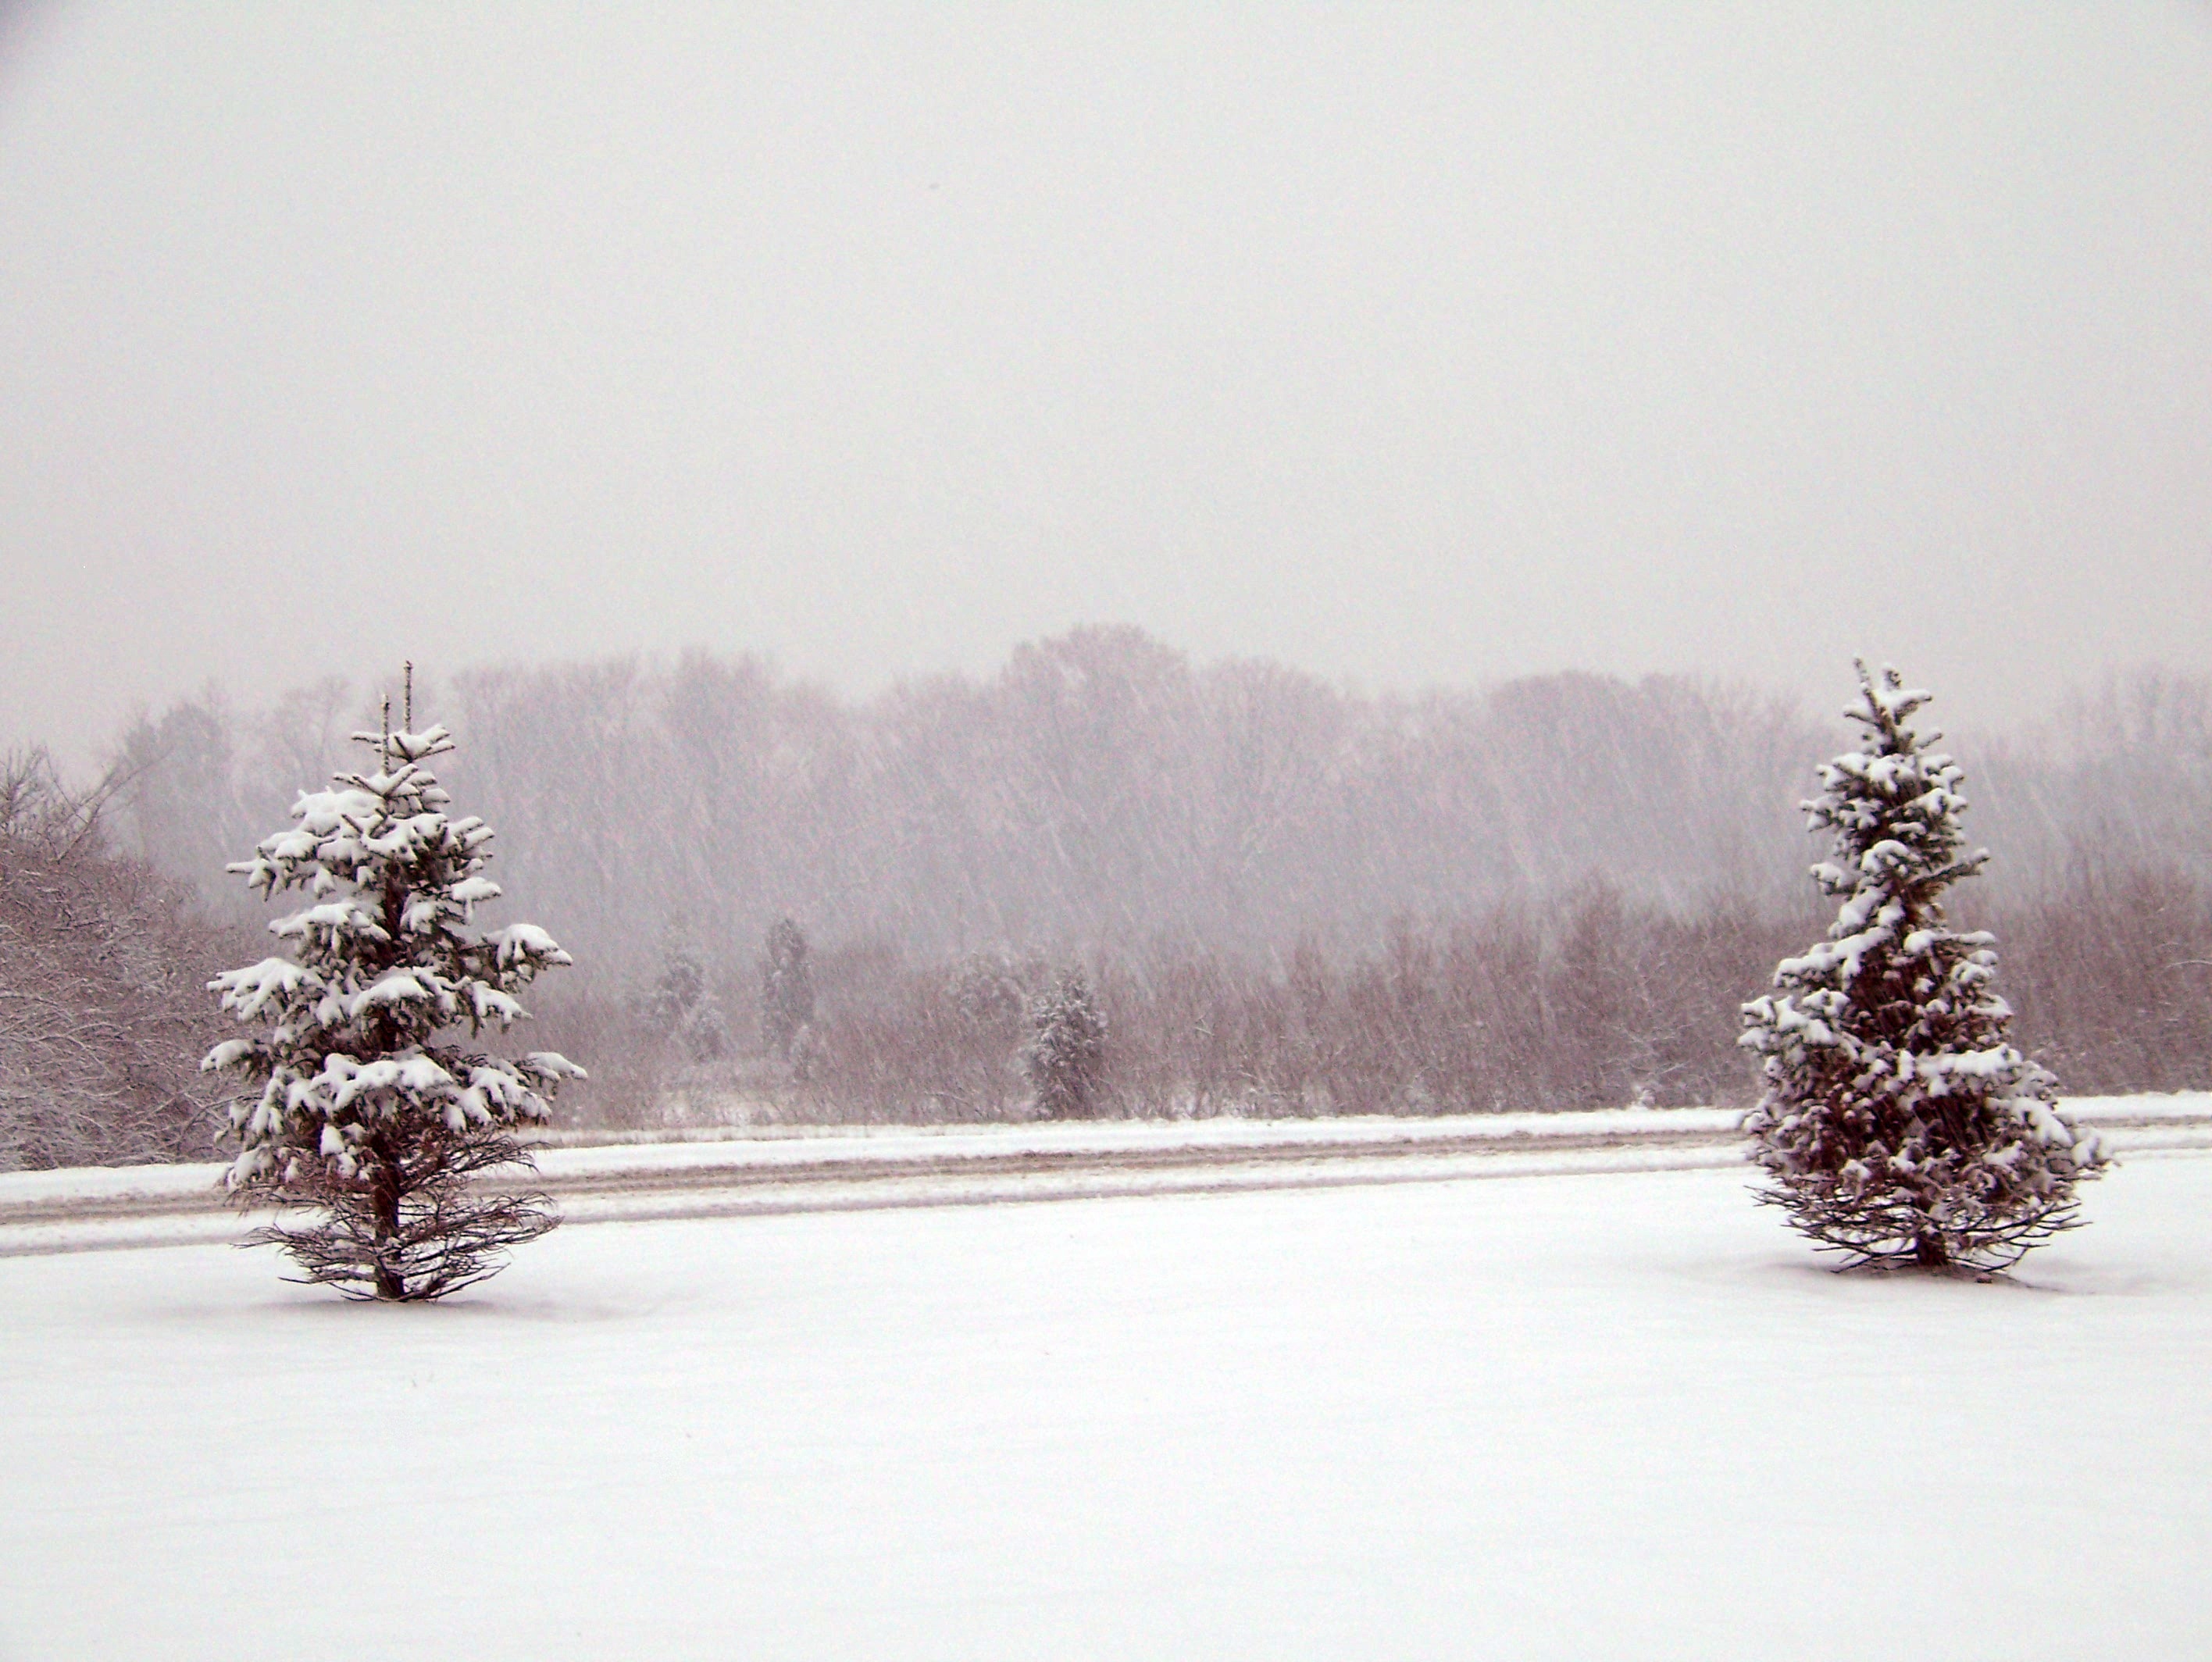 two trees on snowy field during winter